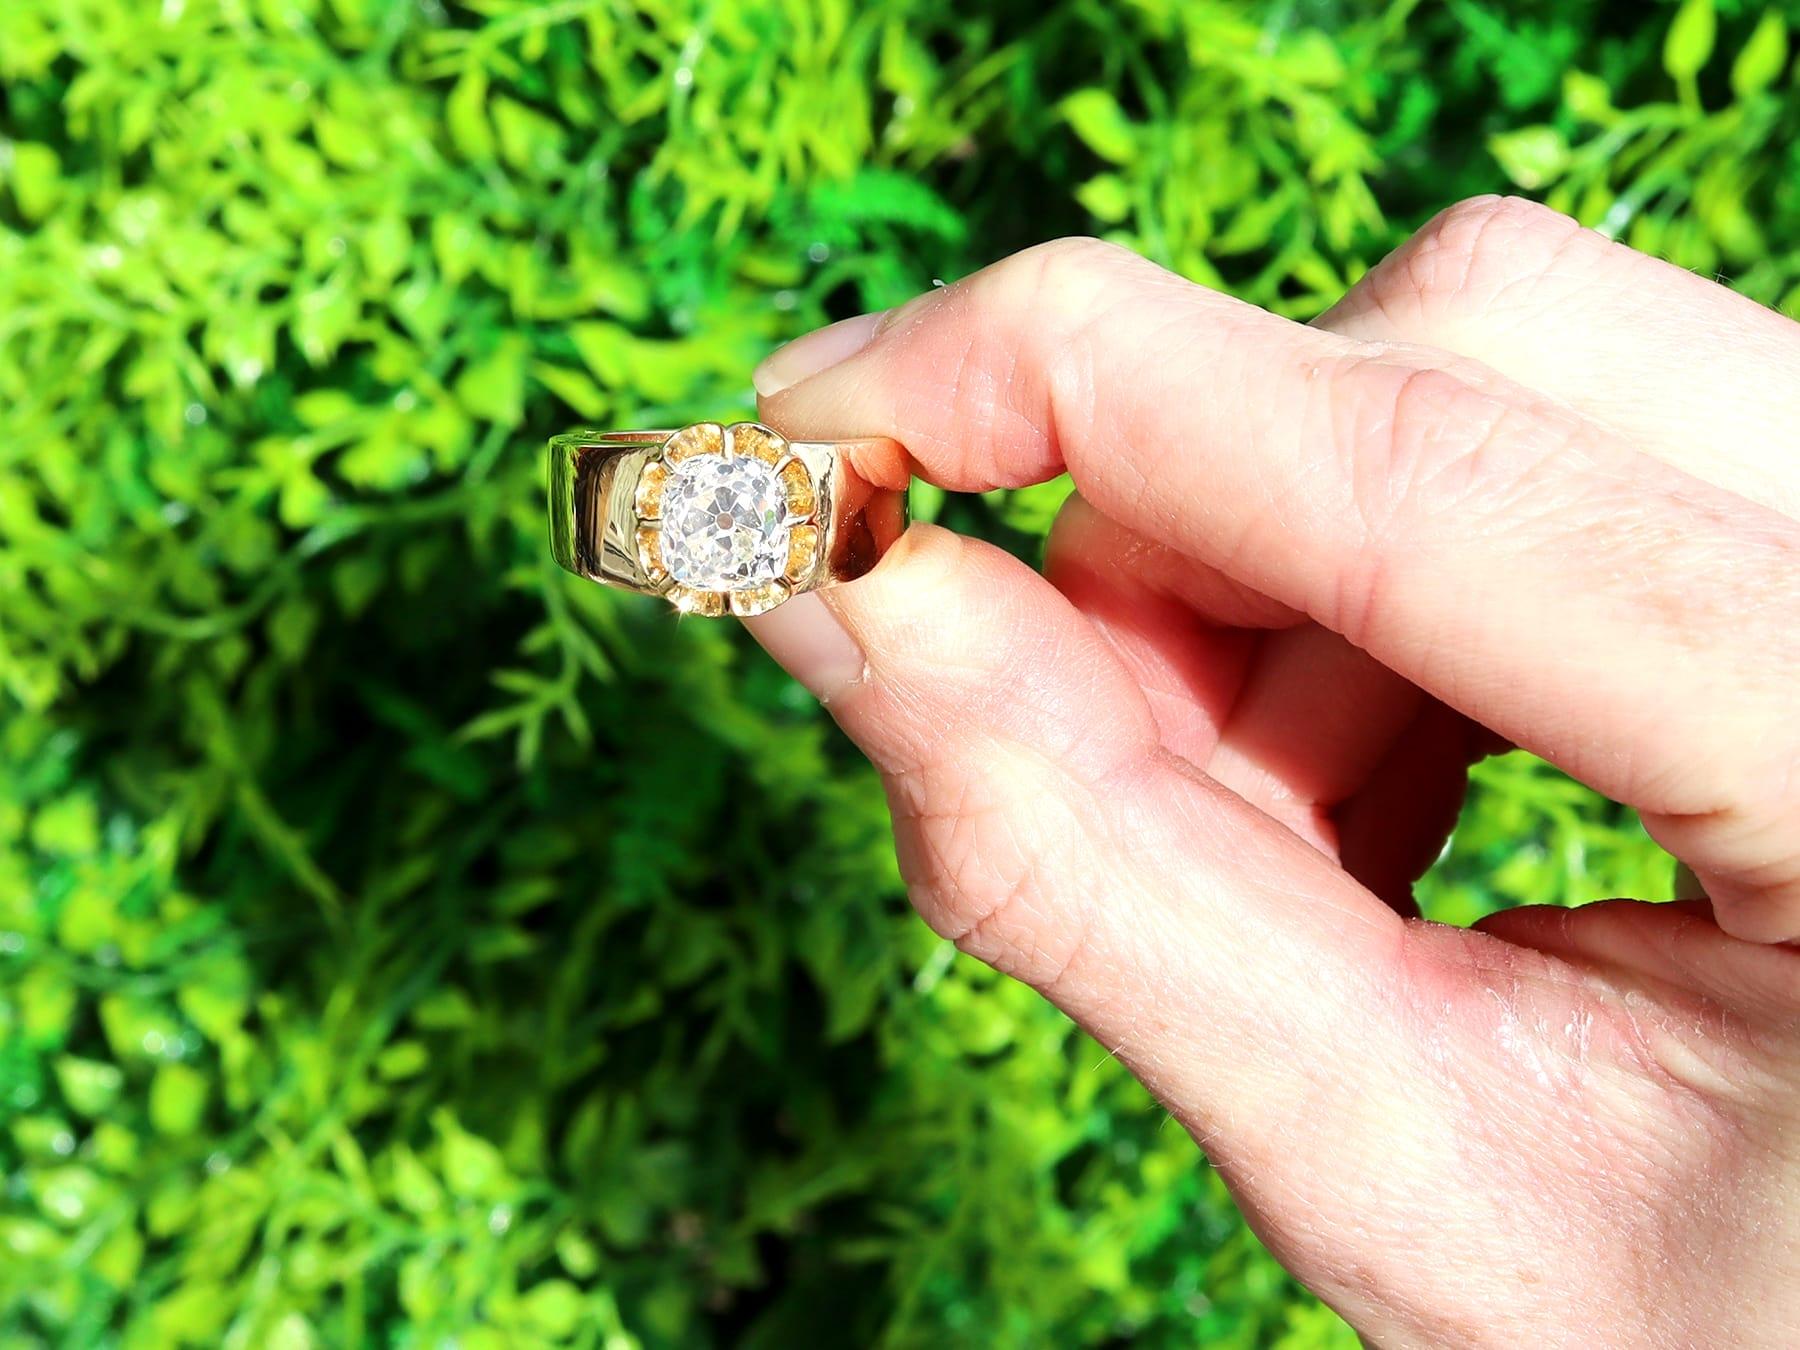 A stunning, fine, and impressive 2.38 carat diamond and 18 karat yellow gold antique unisex solitaire ring; part of our diverse collection of antique jewelry and estate jewelry.

This stunning unisex gold solitaire ring has been crafted in 18k